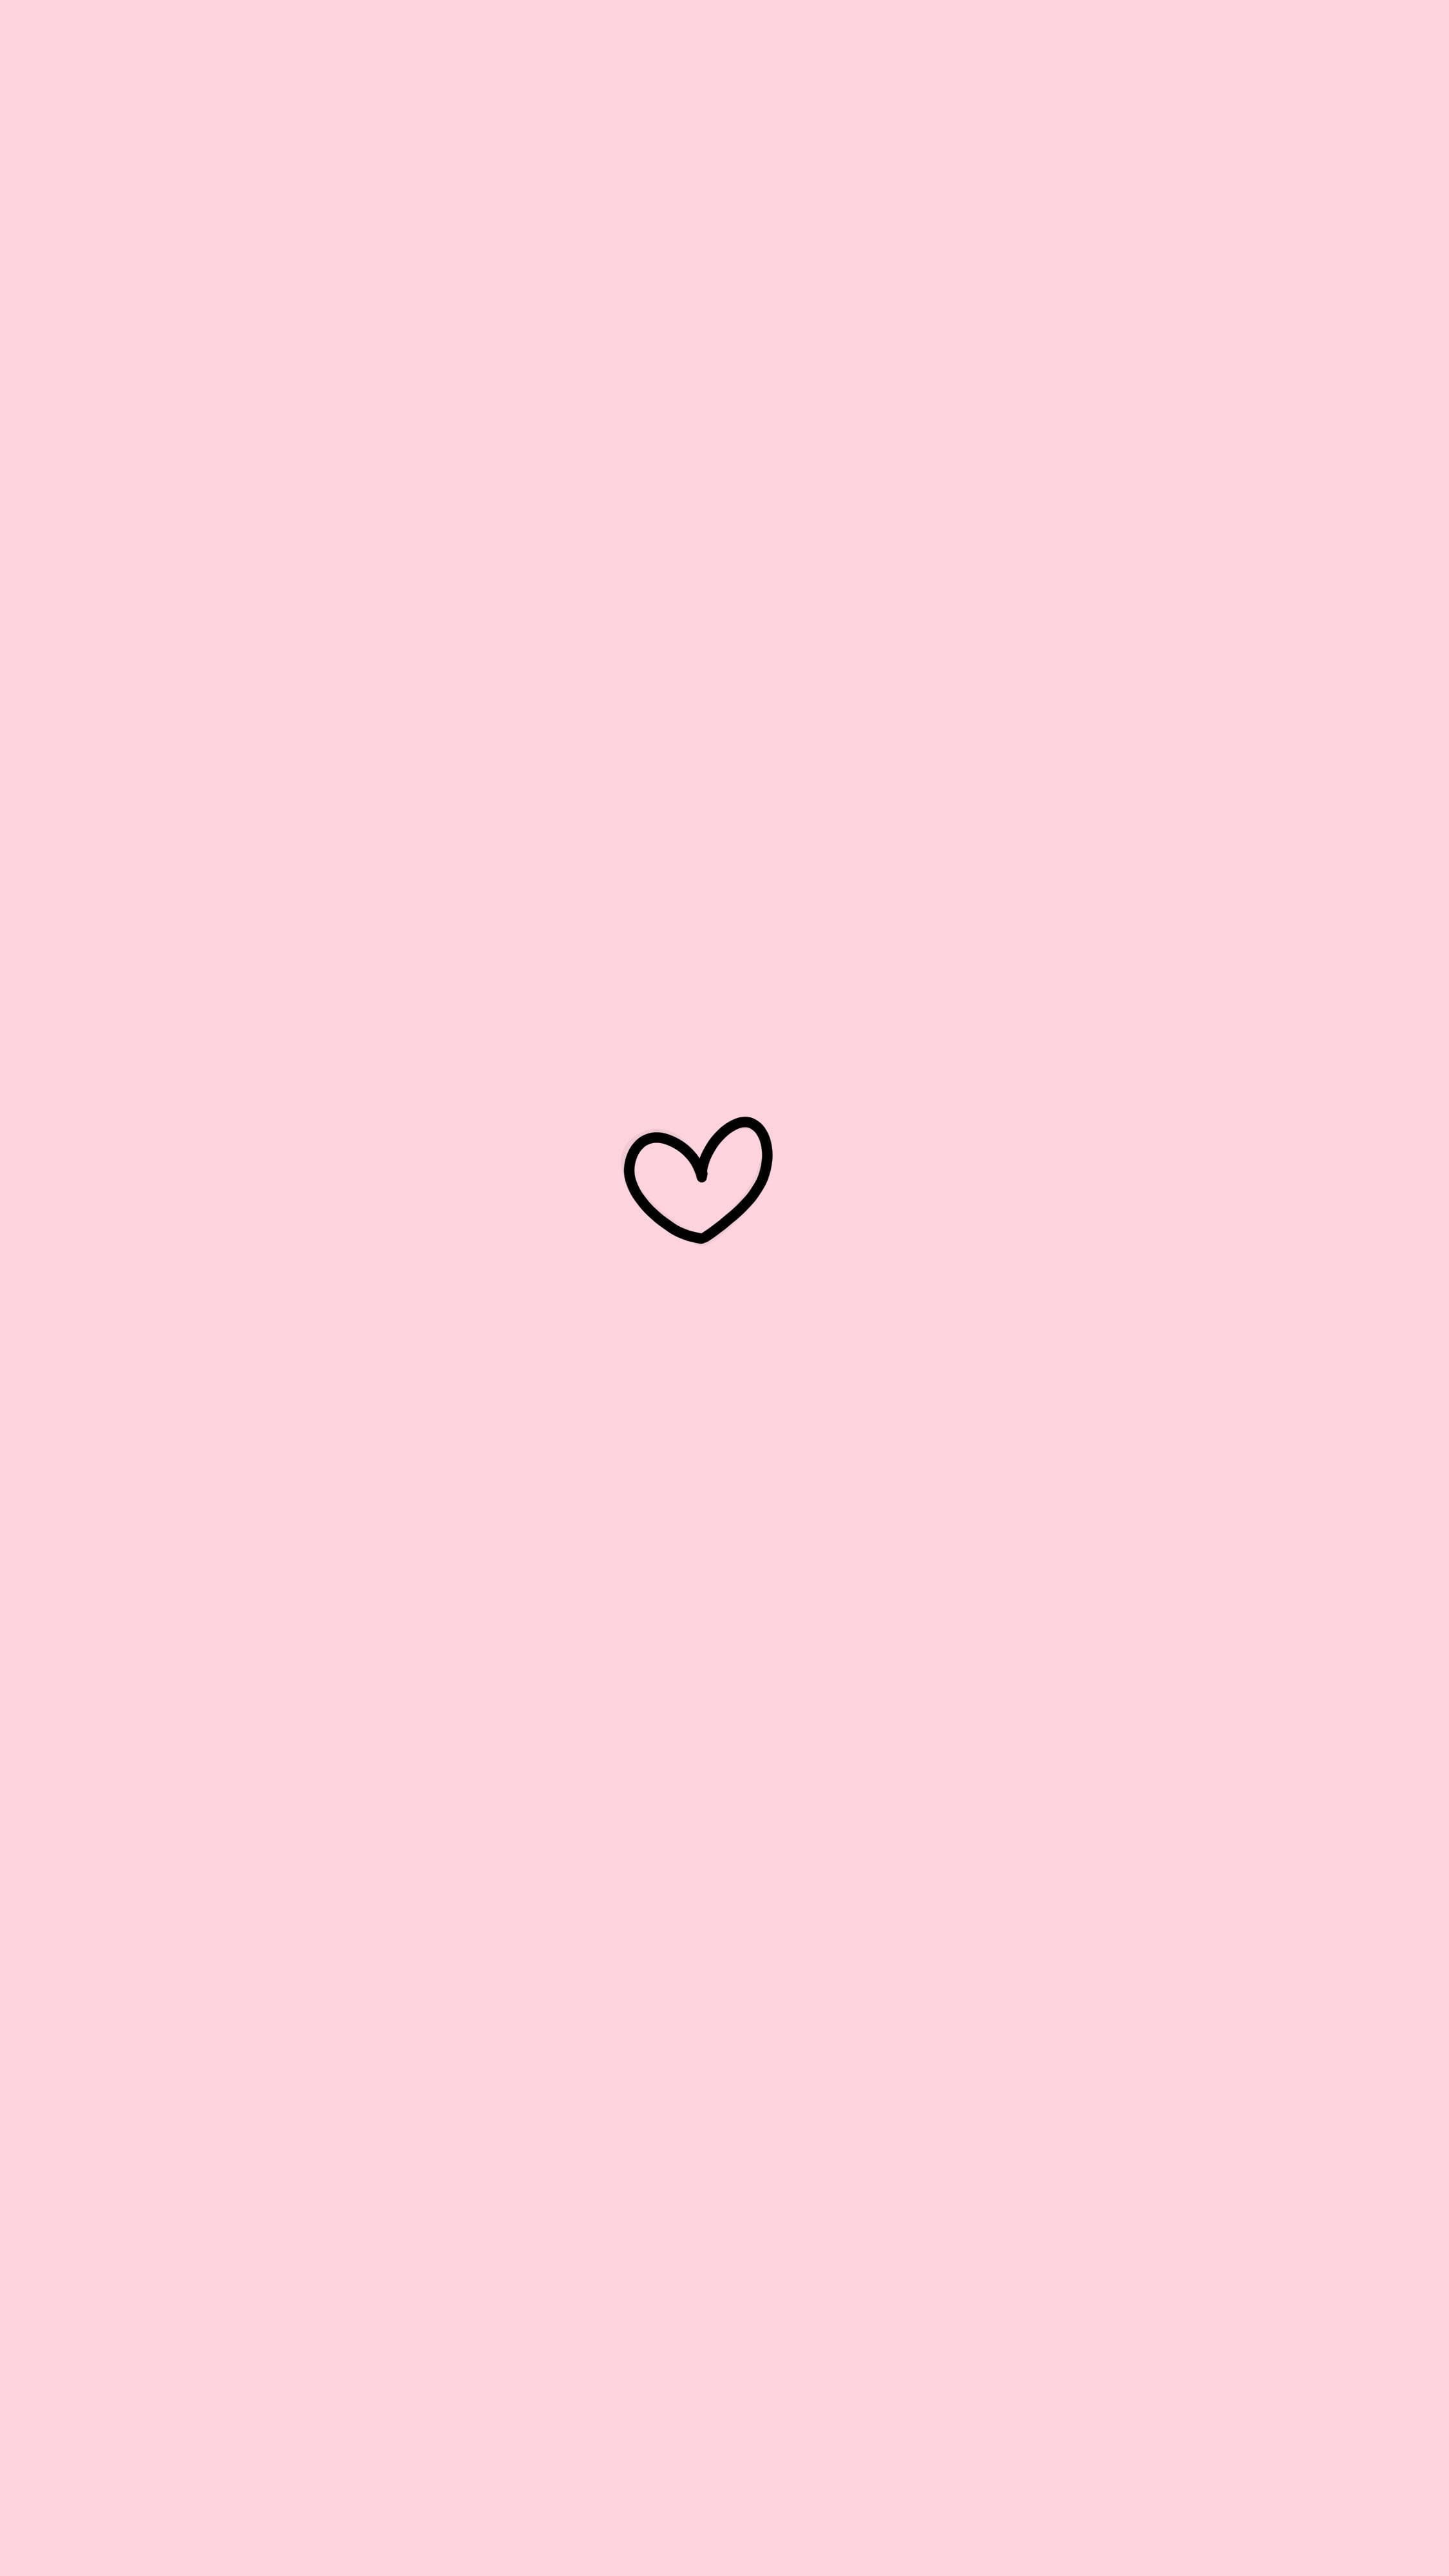 A simple heart on a pink background - Pink, cute, cute pink, heart